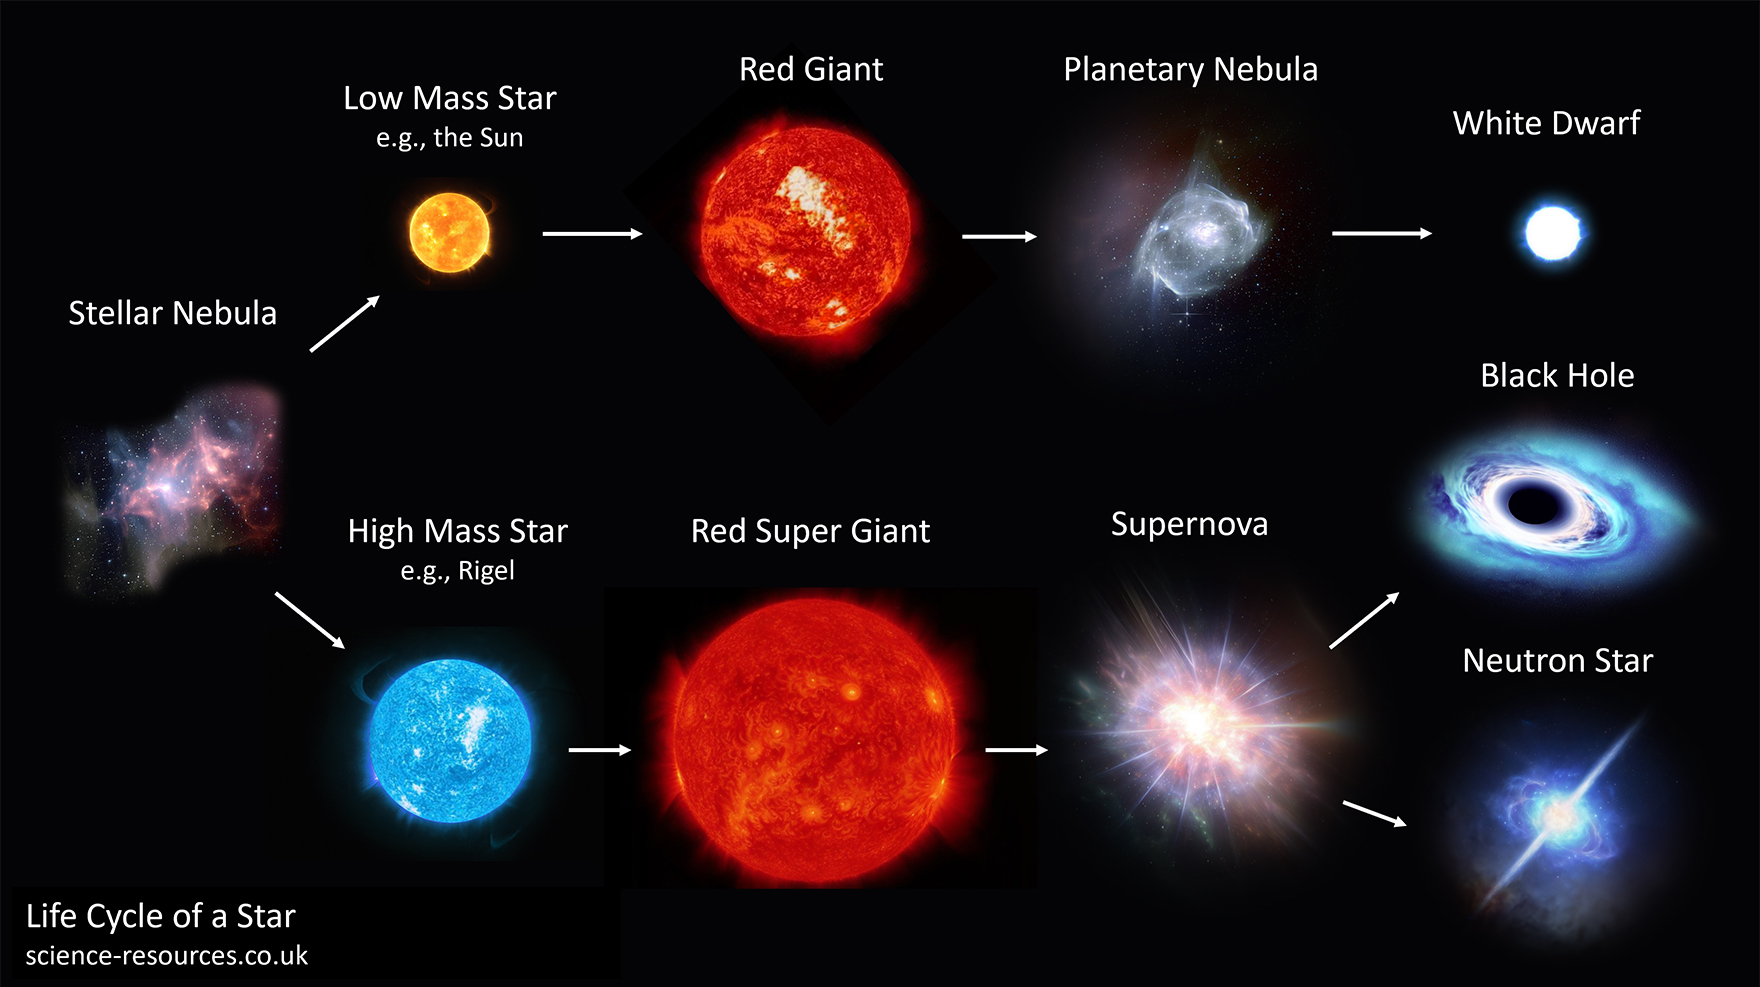 Image showing the life cycle of a star. Top (from left to right): Stellar Nebula, low mass star, red giant, planetary nebula, and white dwarf. Bottom (from left to right): Stellar nebula, high mass star, red super giant, supernova, black hole or neutron star.